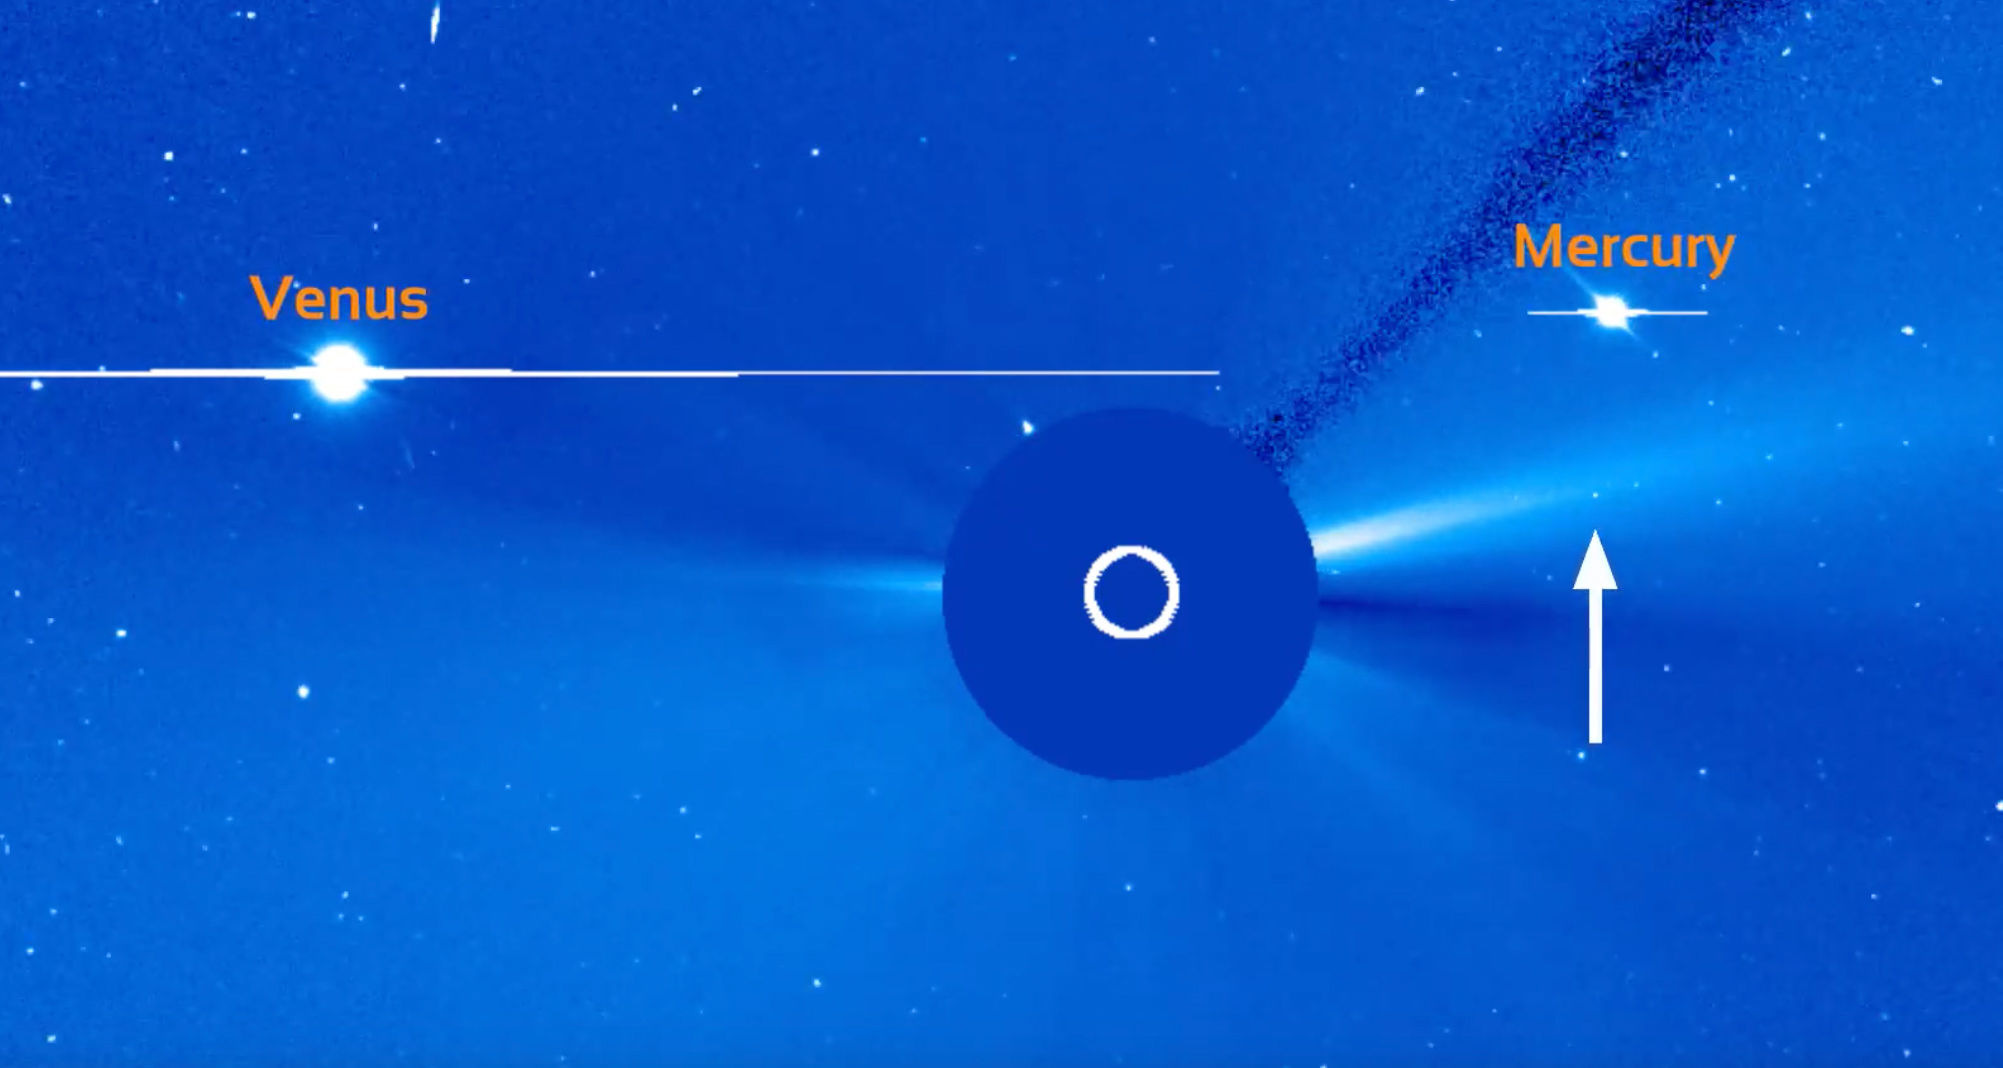 The comet-like asteroid 322P/SOHO was seen once again by SOHO in August 2019. Credit: ESA/NASA SOHO and Karl Battams